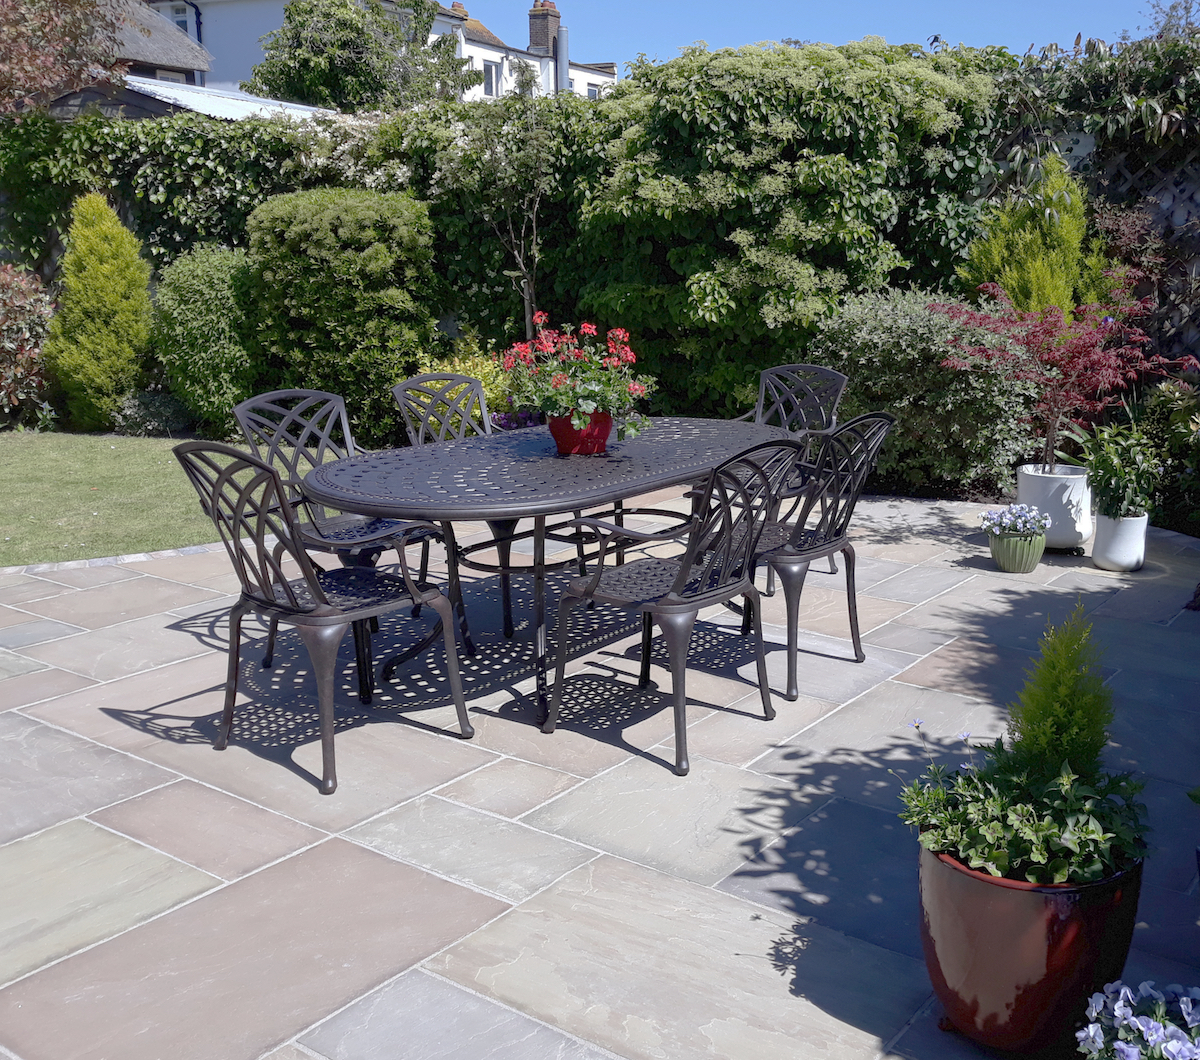 Why is cast aluminium the best material for garden furniture?